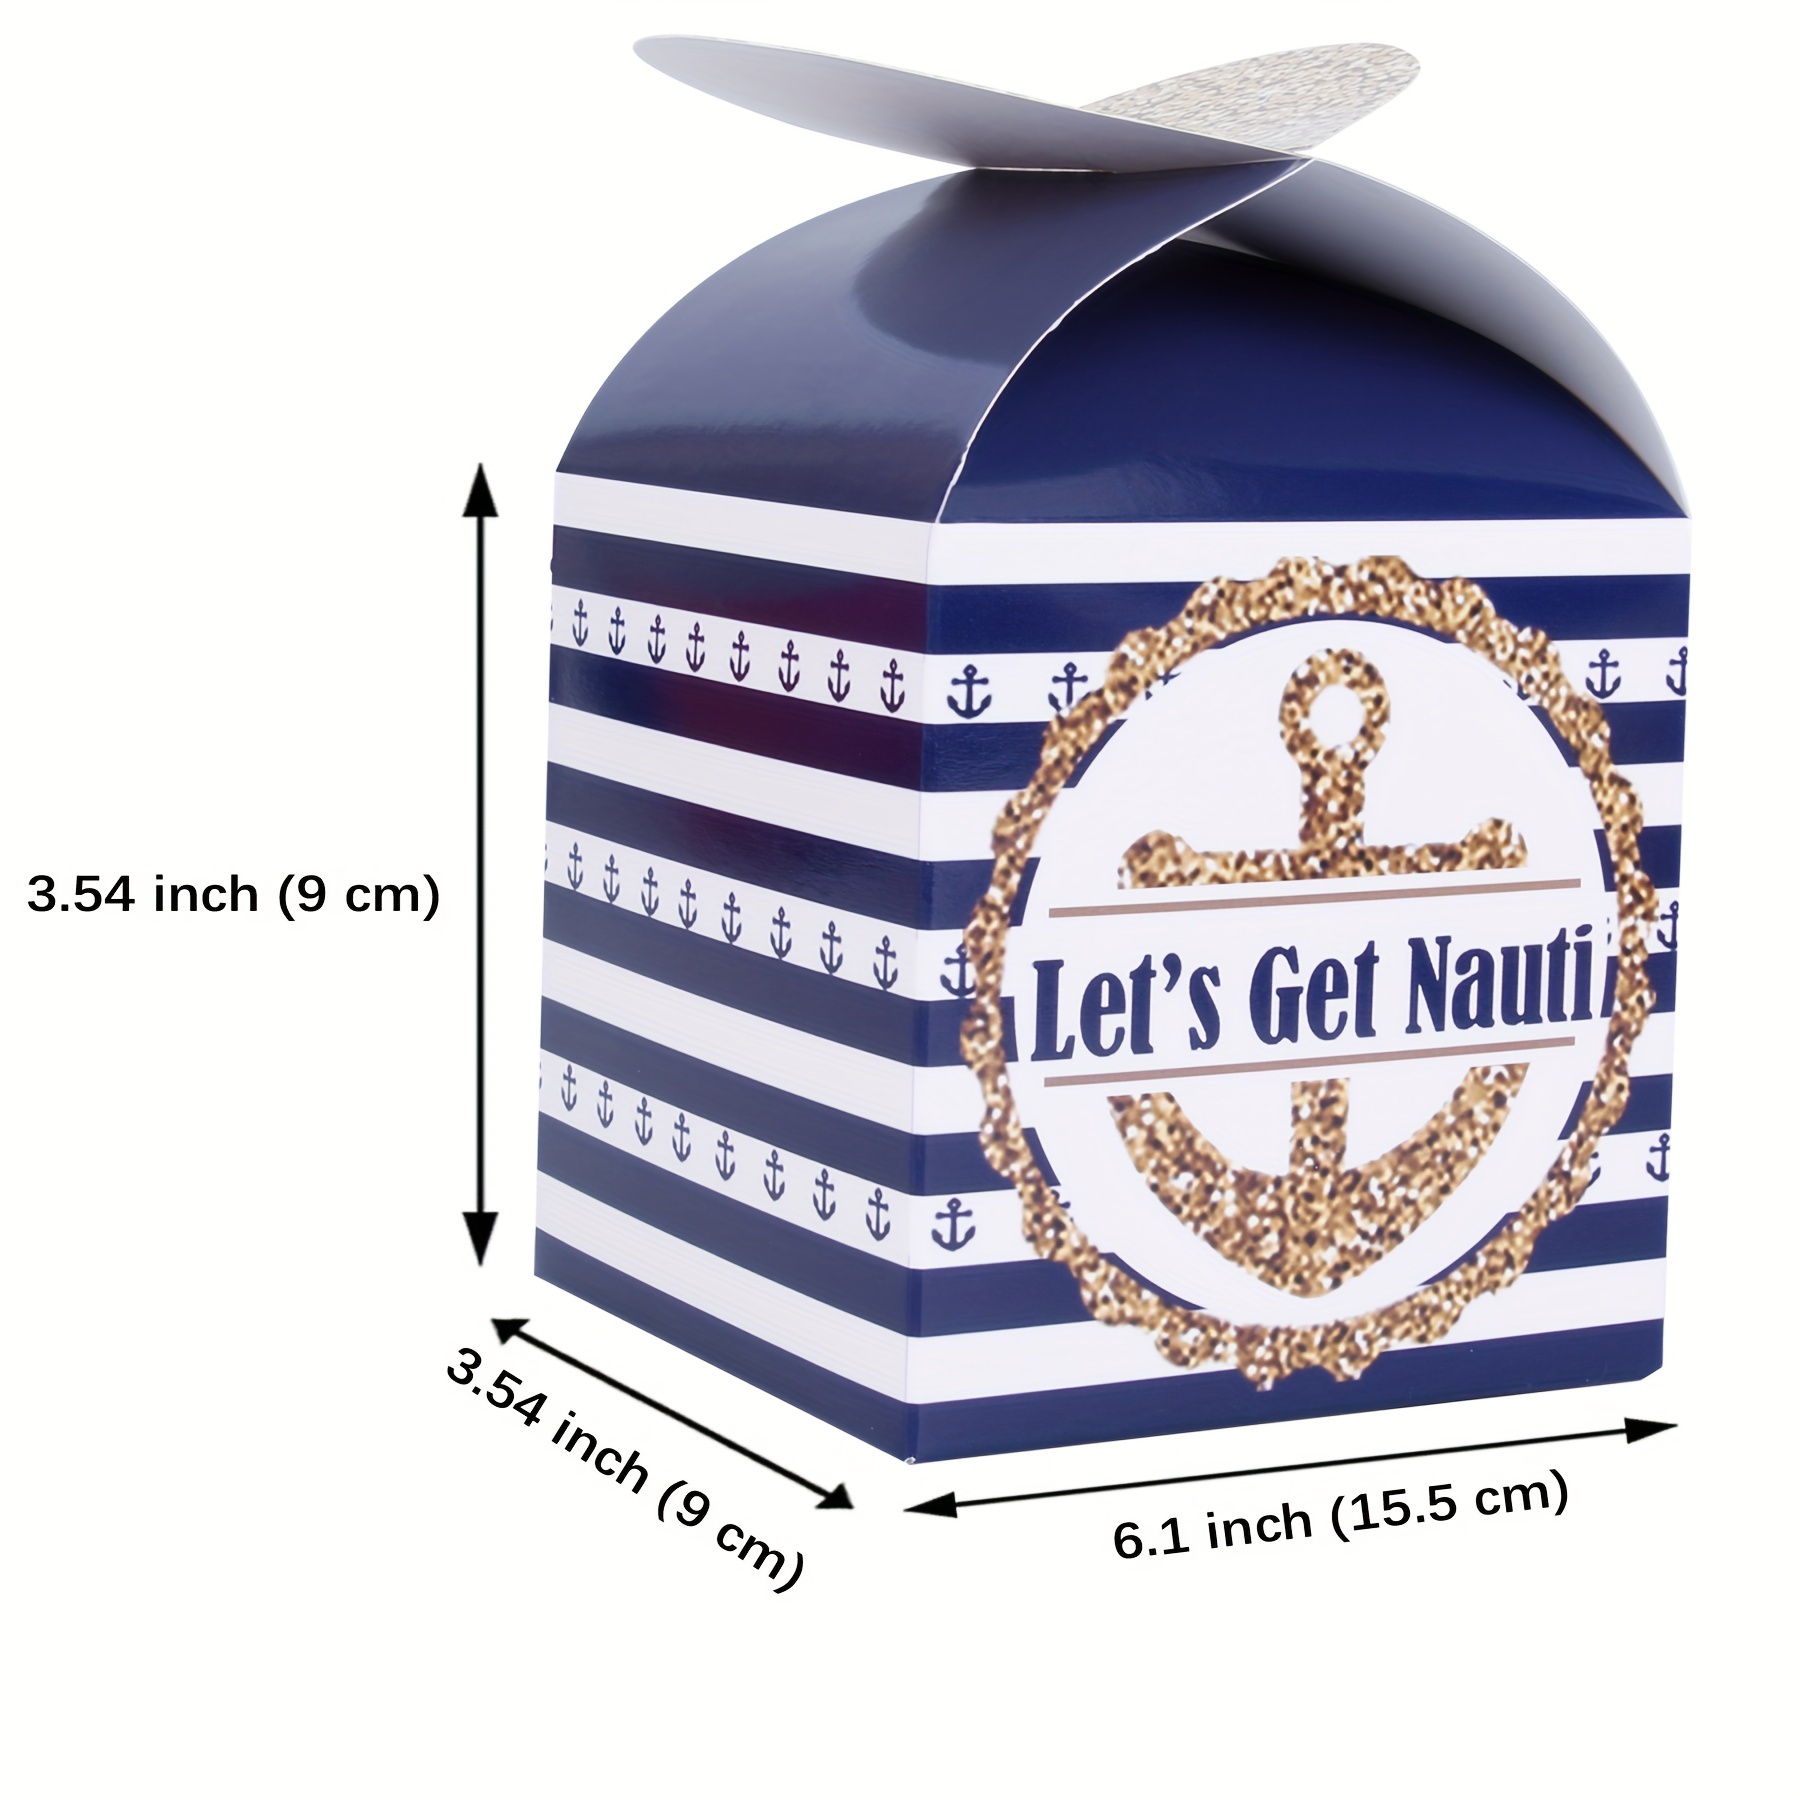 Navy Blue Lets Get Nauti Nautical Sailor Bride Vibes Beer Can